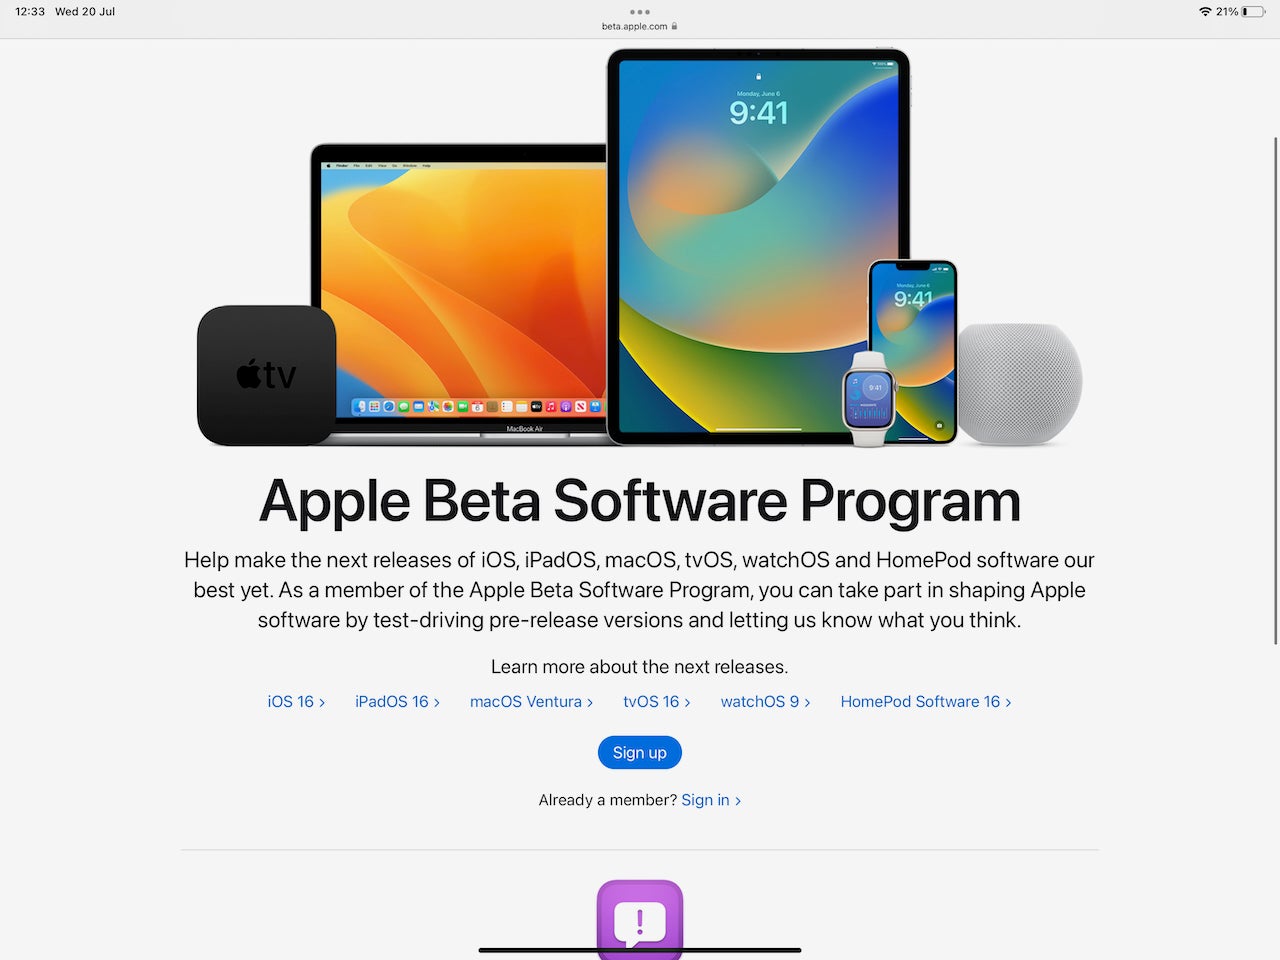 On your iPad, go to the Apple beta site